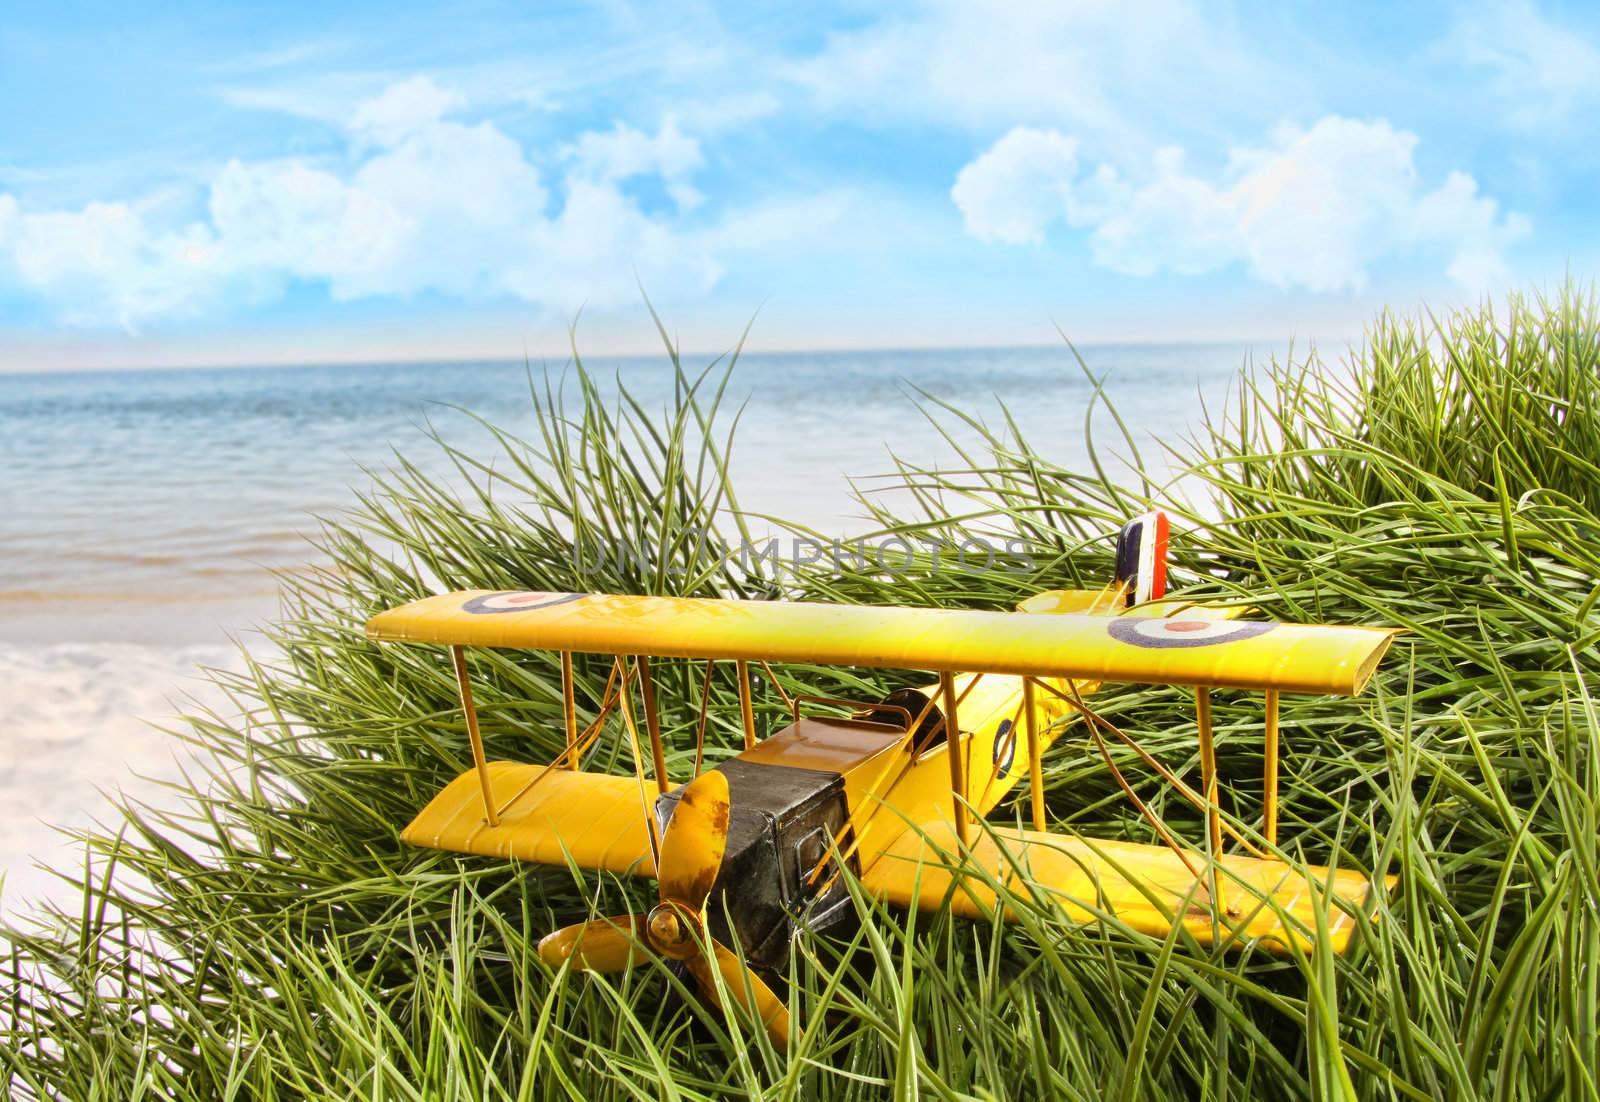 Vintage yellow toy plane in tall grass at the beach